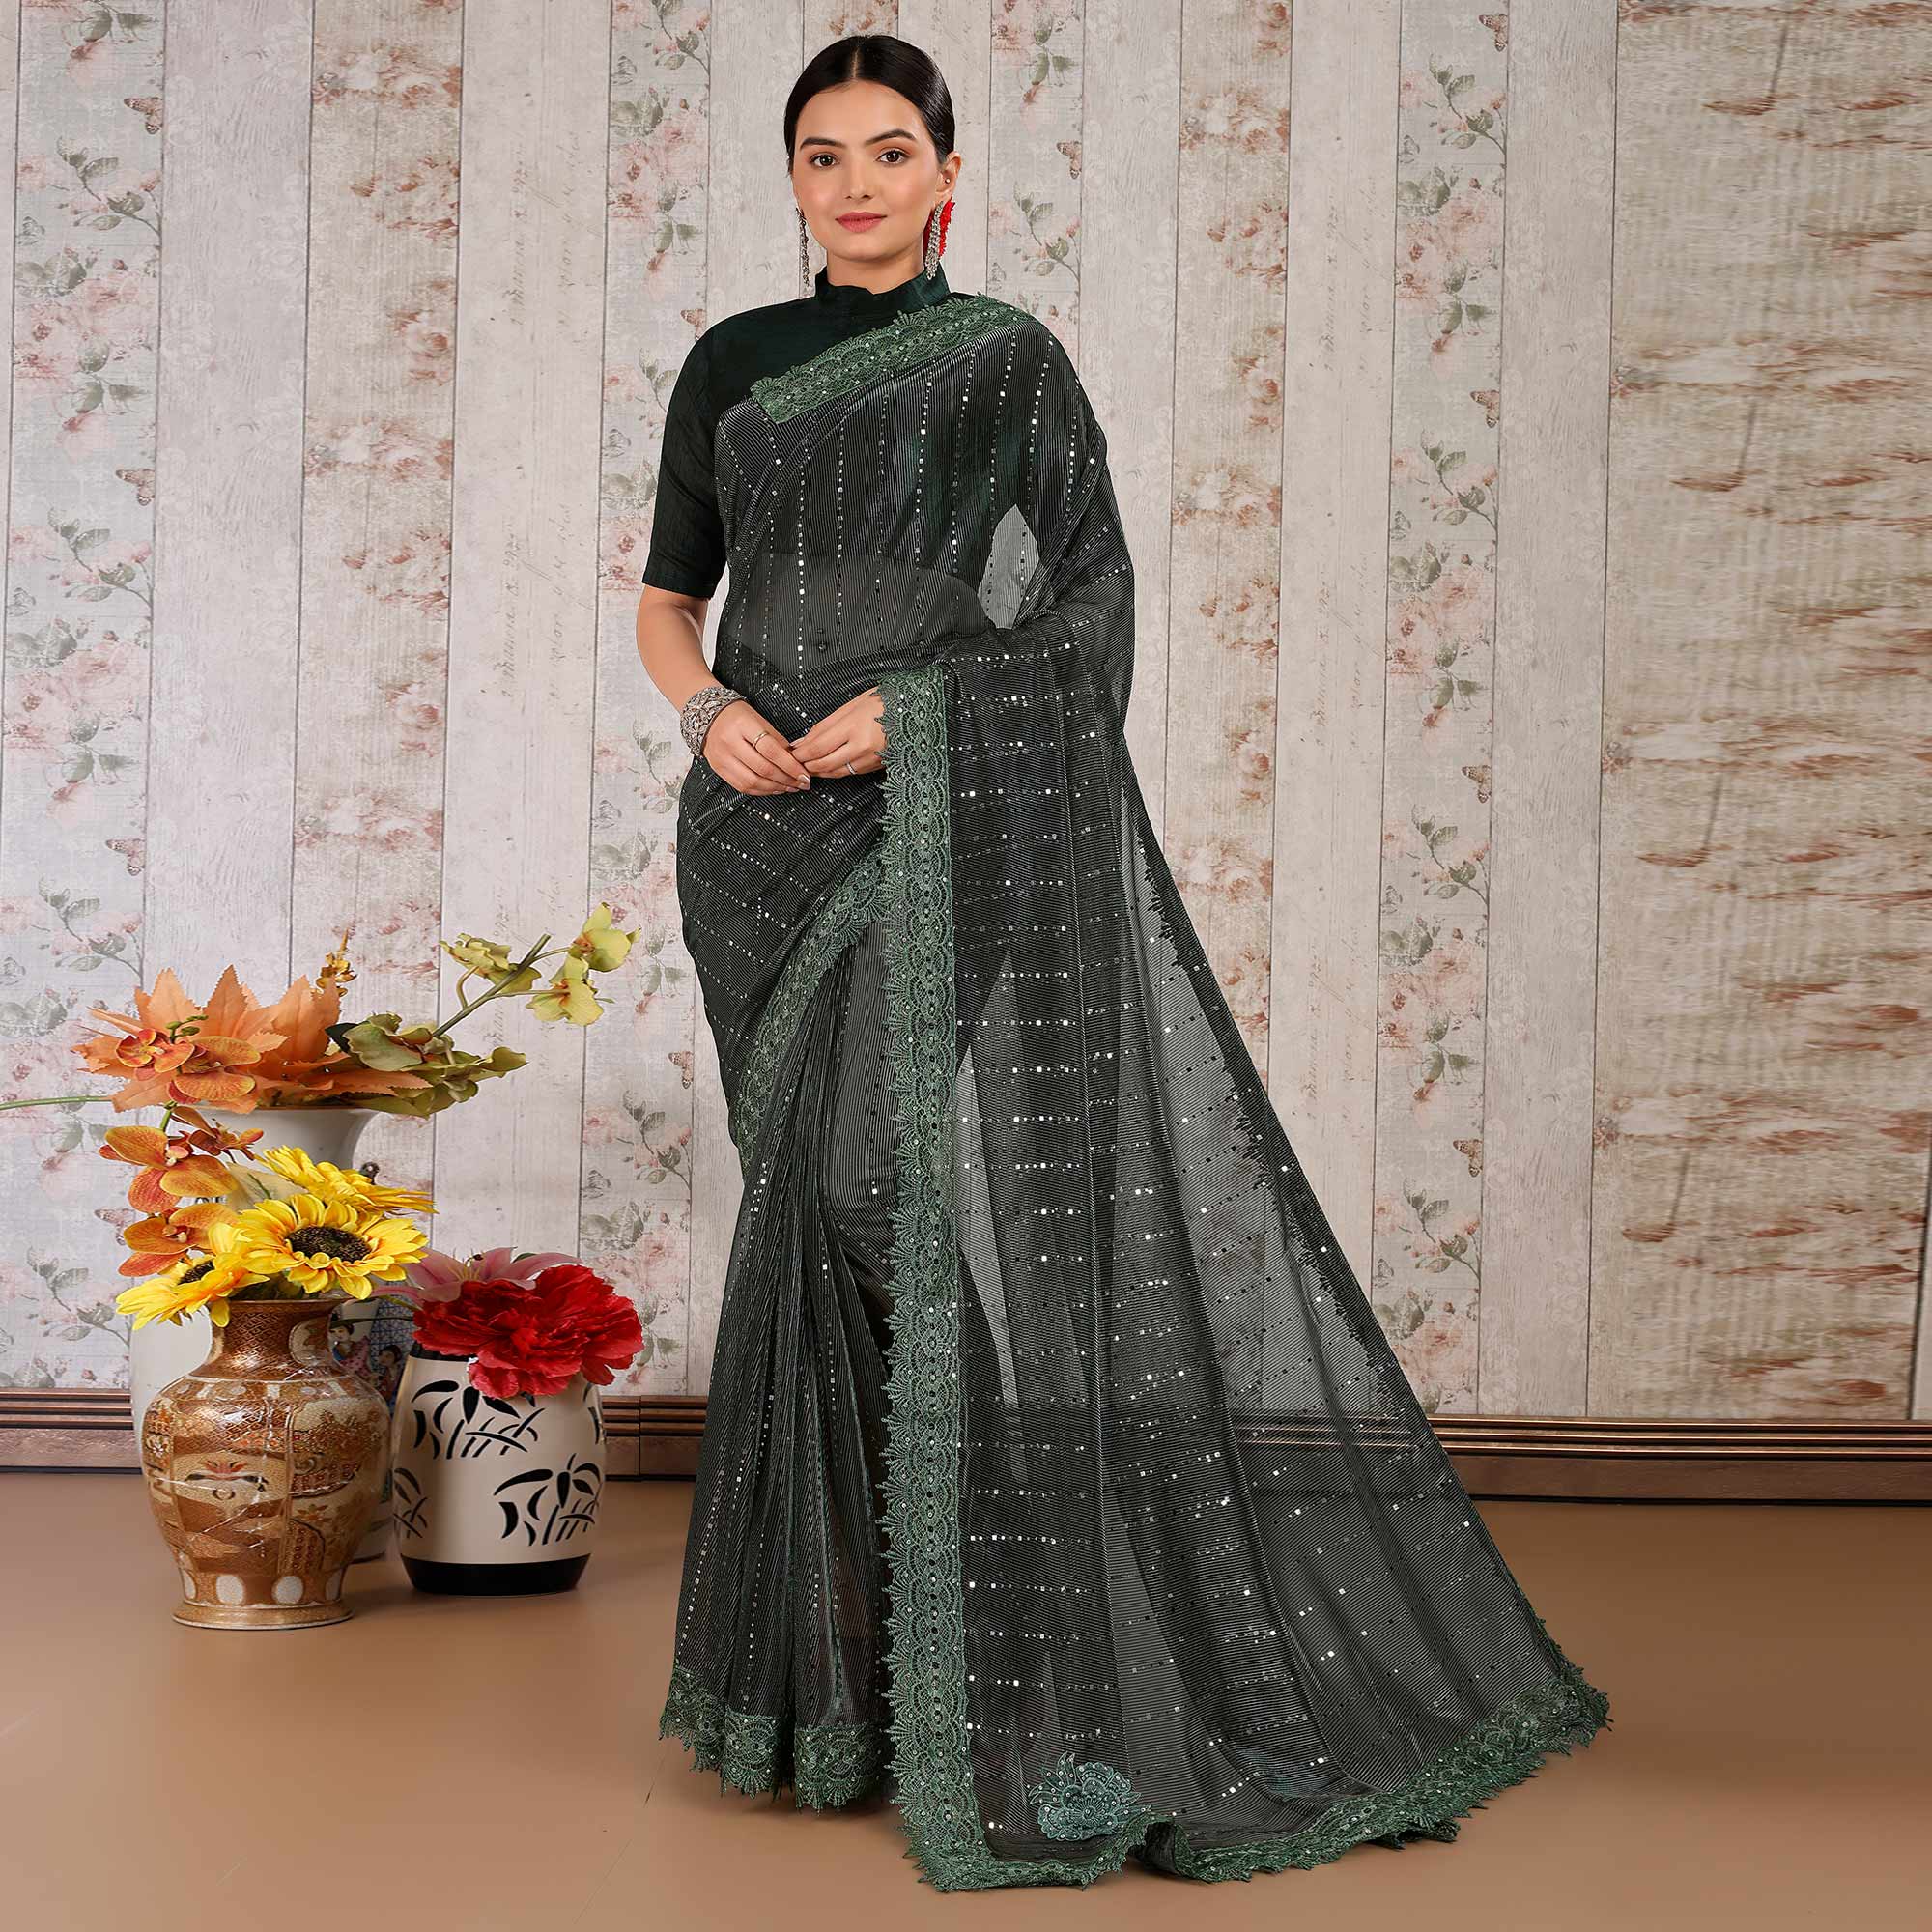 Green Tikali Work Lycra Saree With Embroidered Lace Border